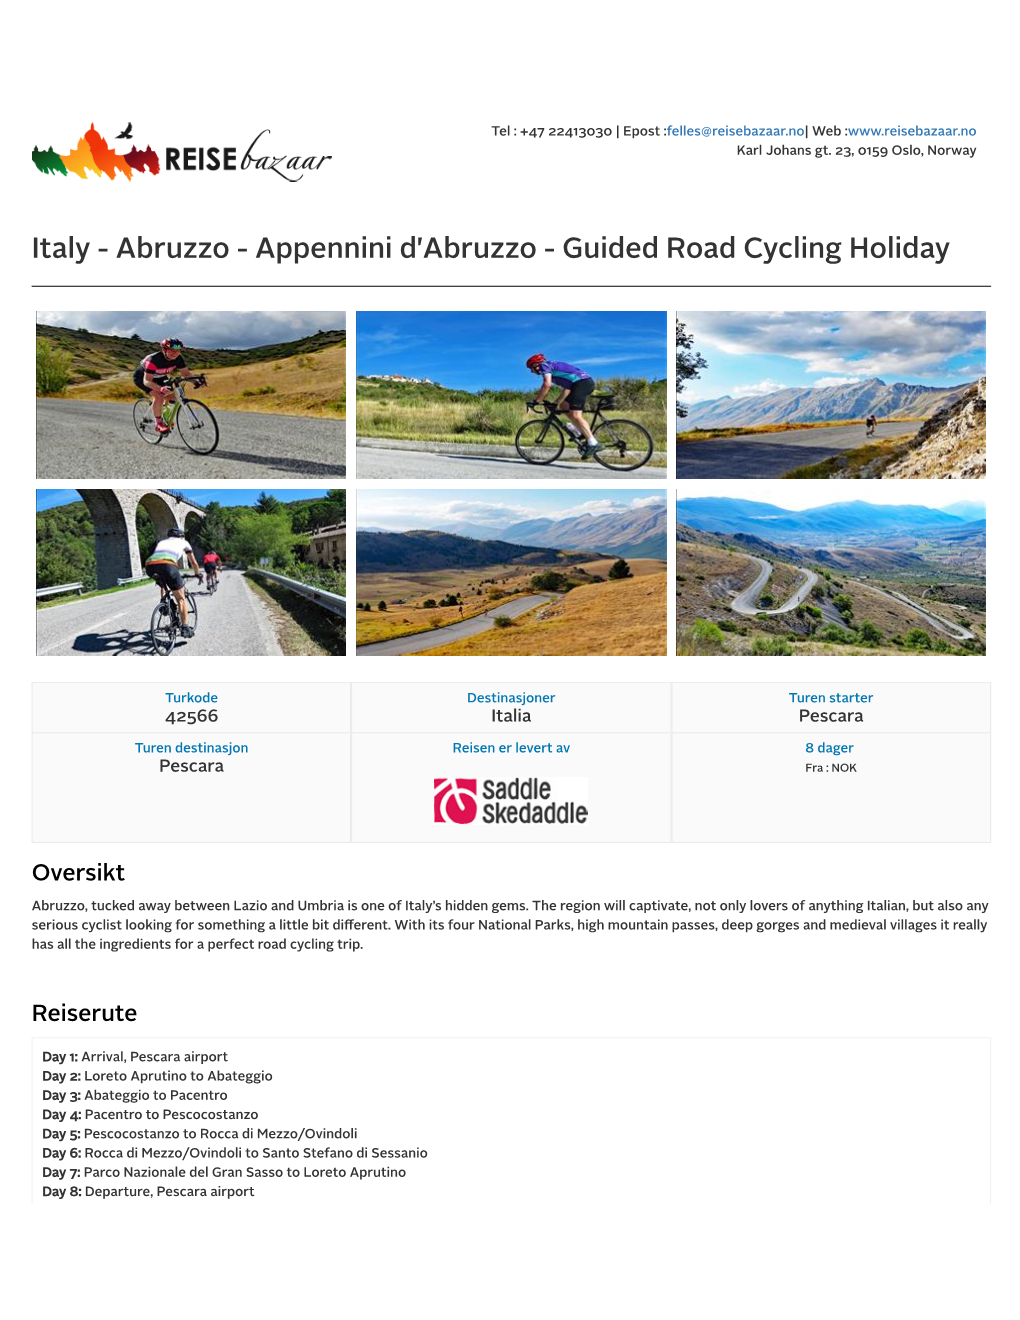 Abruzzo - Appennini D'abruzzo - Guided Road Cycling Holiday